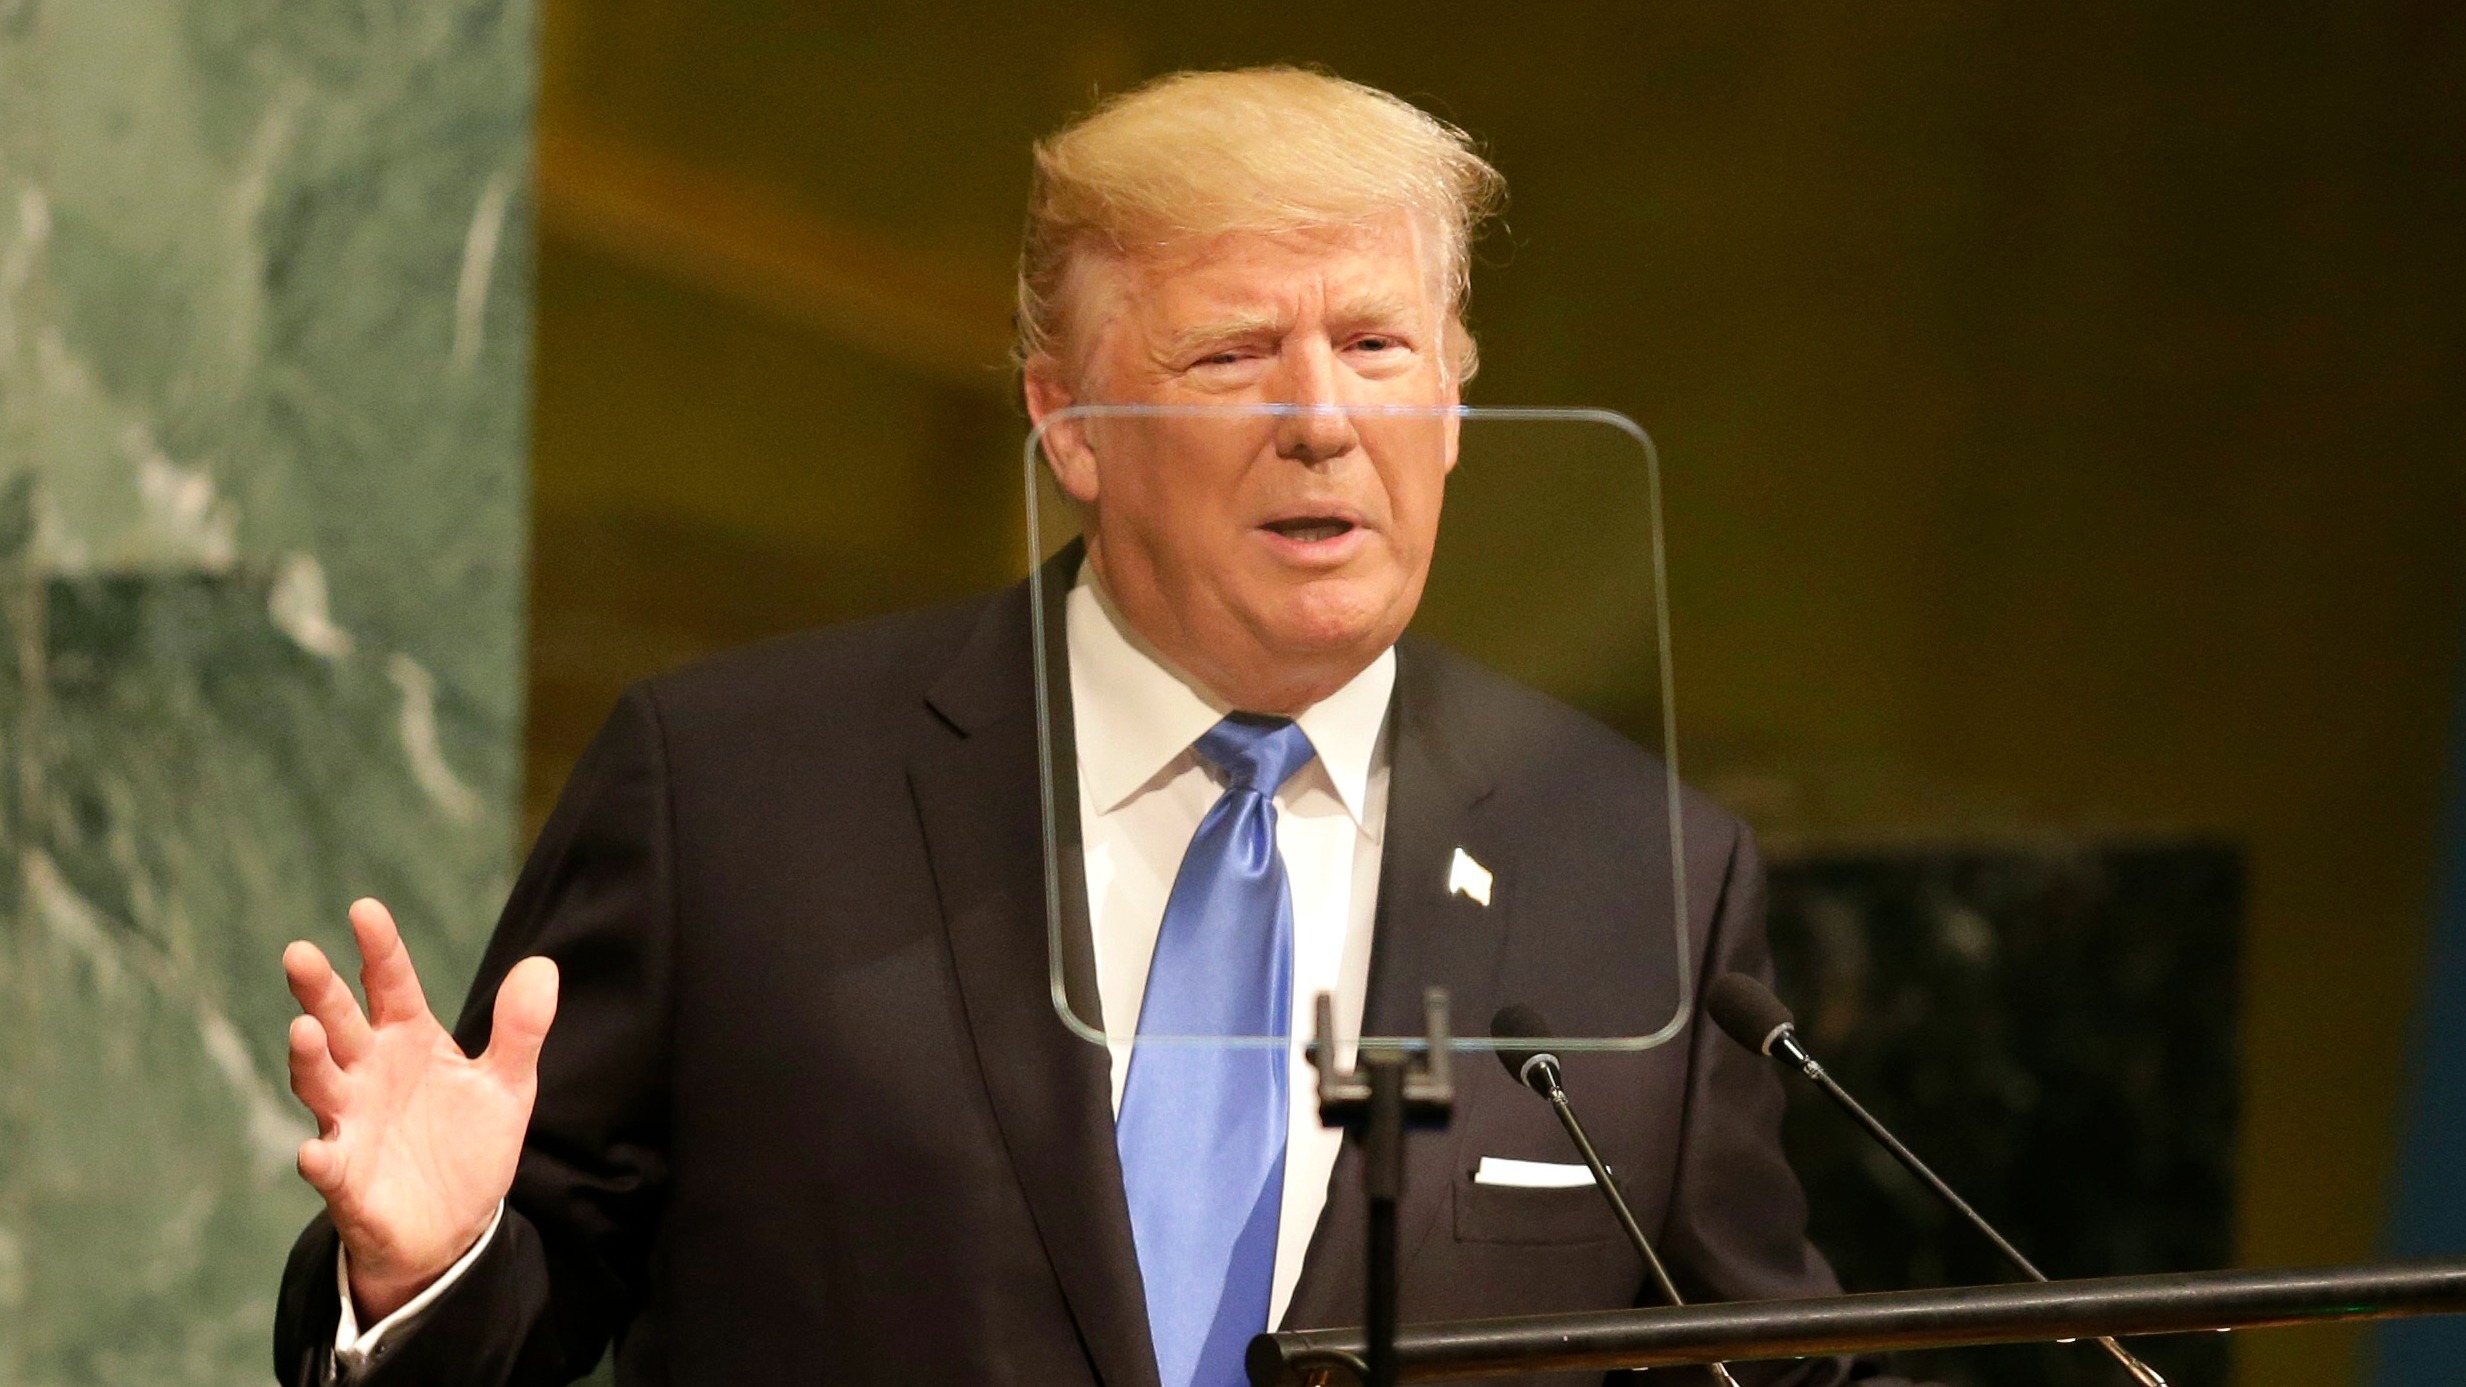 United States President Donald Trump speaks during the United Nations General Assembly at U.N. headquarters, Tuesday, Sept. 19, 2017. (AP Photo/Seth Wenig)